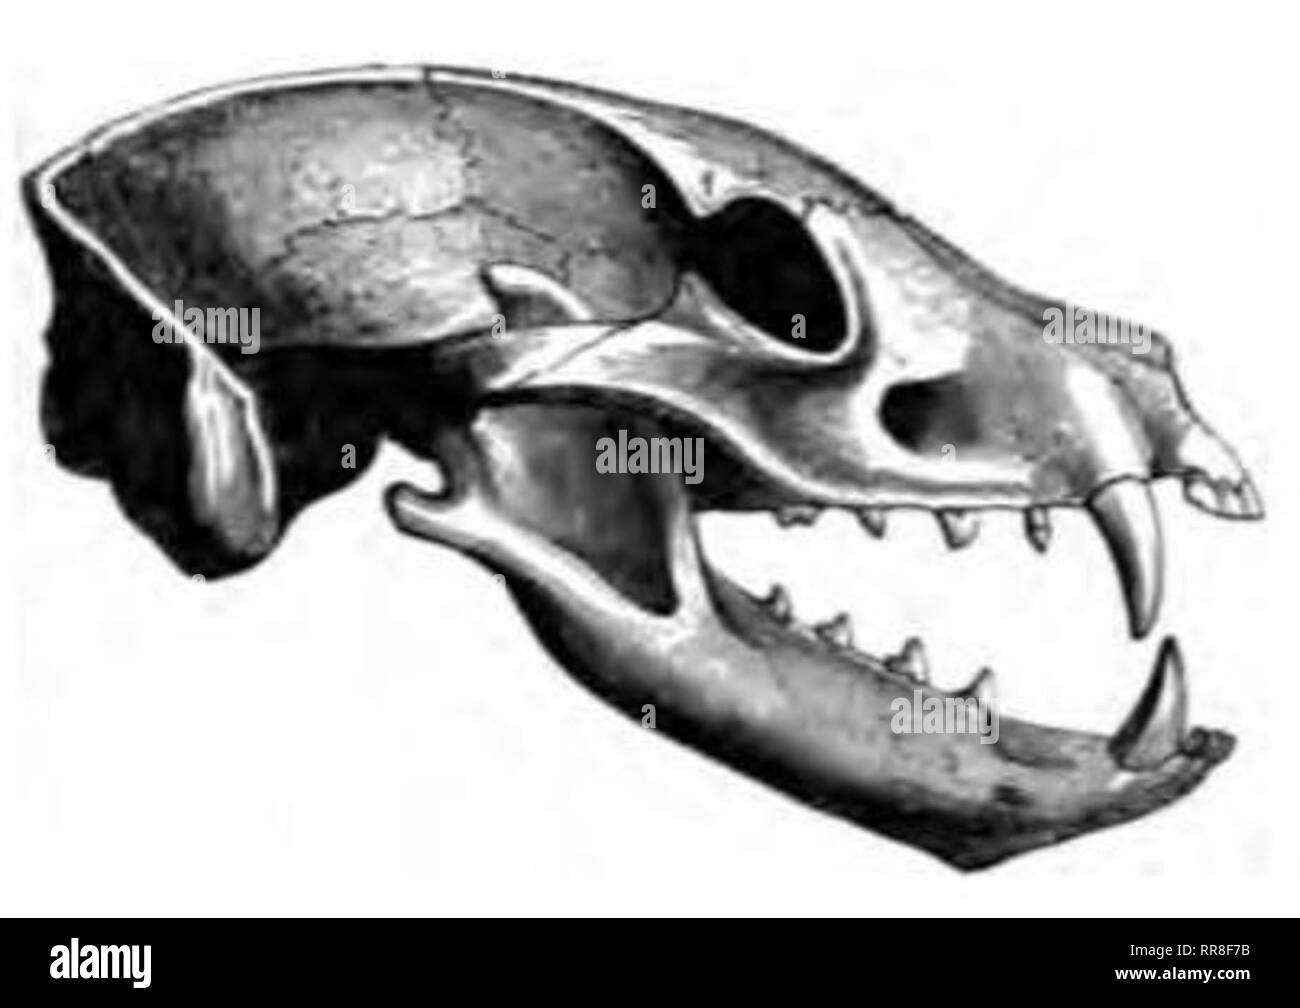 This aardwolf skull exhibits greatly reduced molars and carnassials teeth as they are unnecessary for any large, insectivorous animal subsisting on soft insects such as termites. The dentition of a shrew is very different. The aardwolf uses its canine teeth in self-defence and, occasionally, in digging; accordingly, the canines have not been greatly reduced. Stock Photo